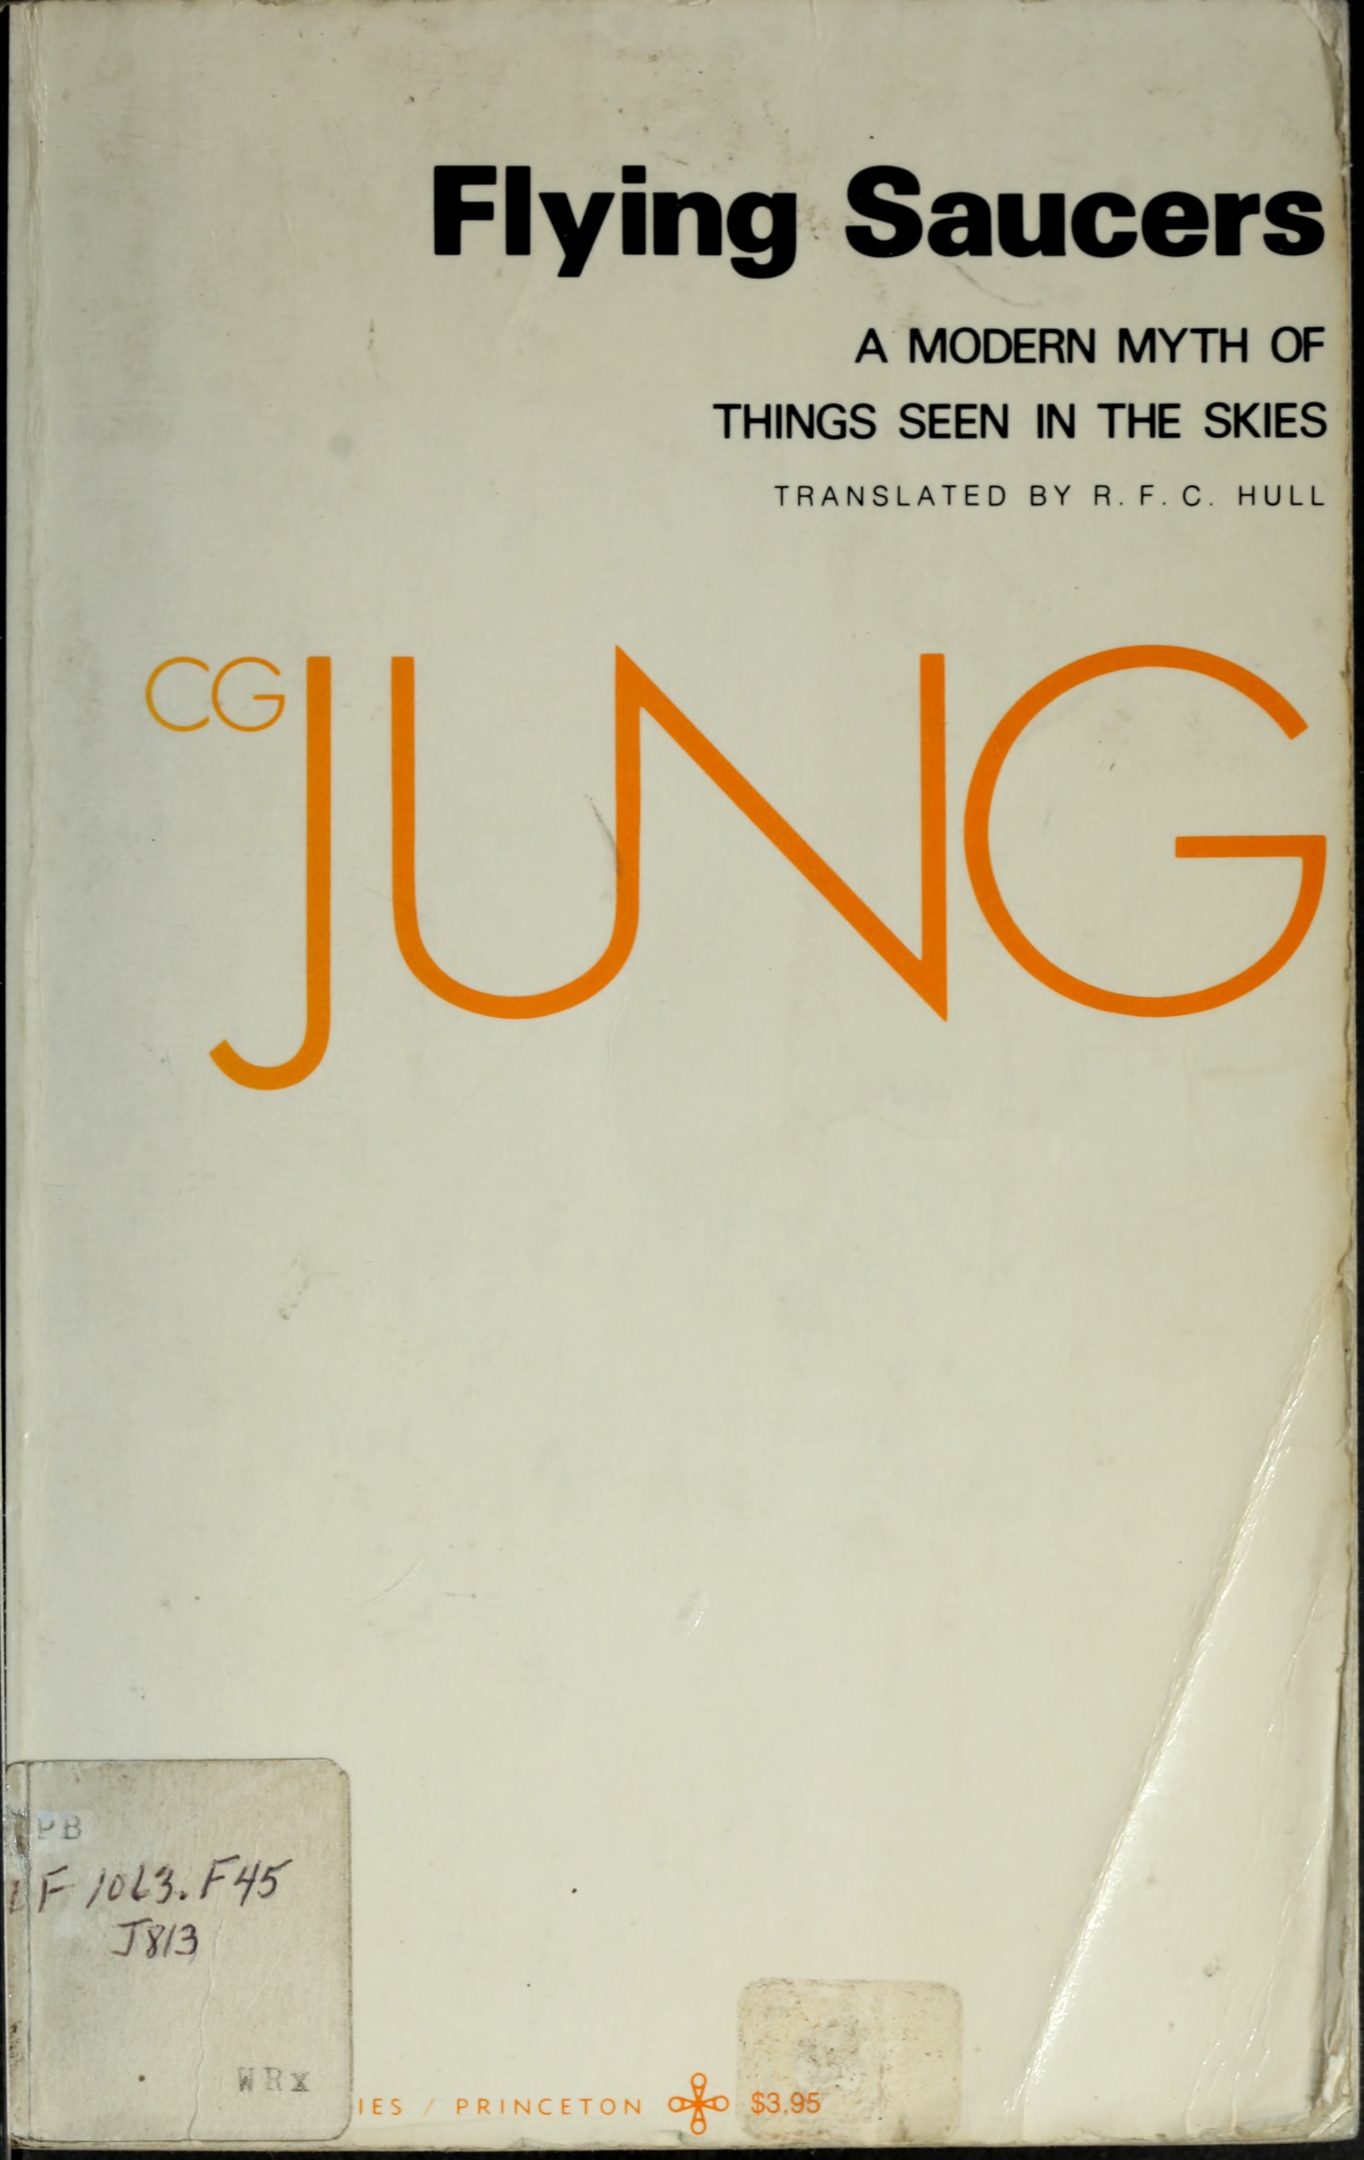 C.G. Jung - Flying Saucers